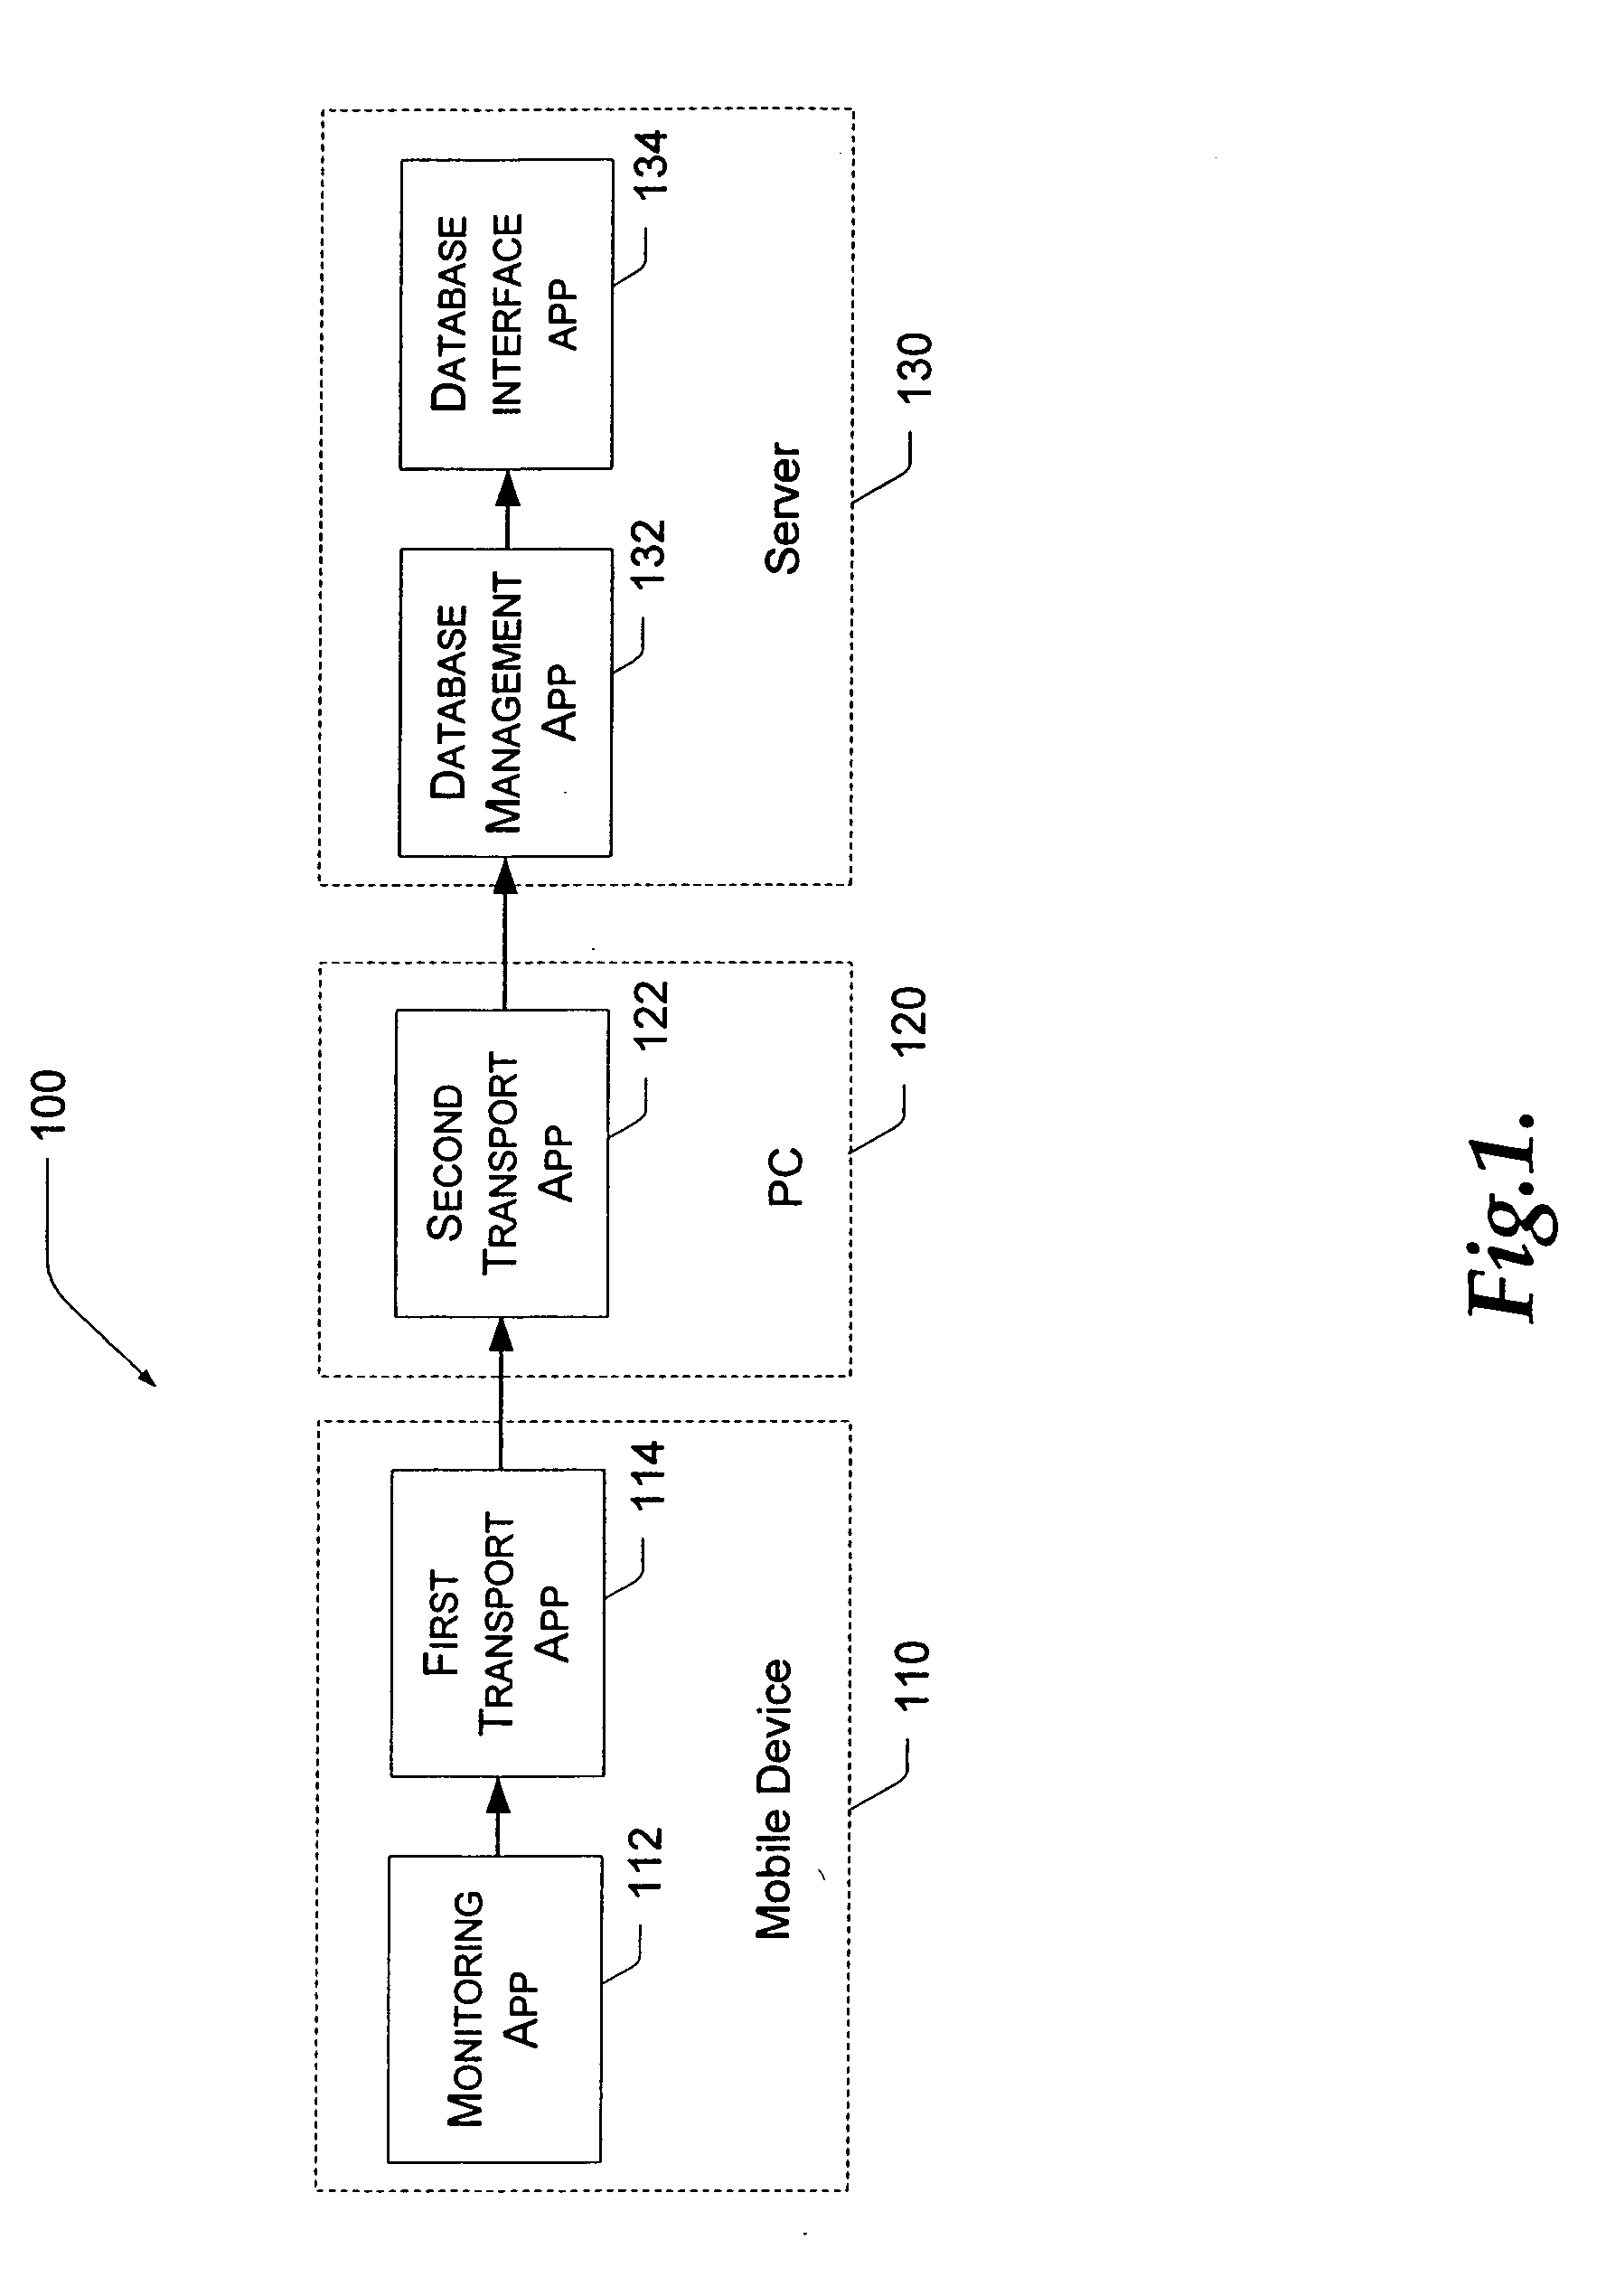 System and method for gathering and automatically processing user and debug data for mobile devices